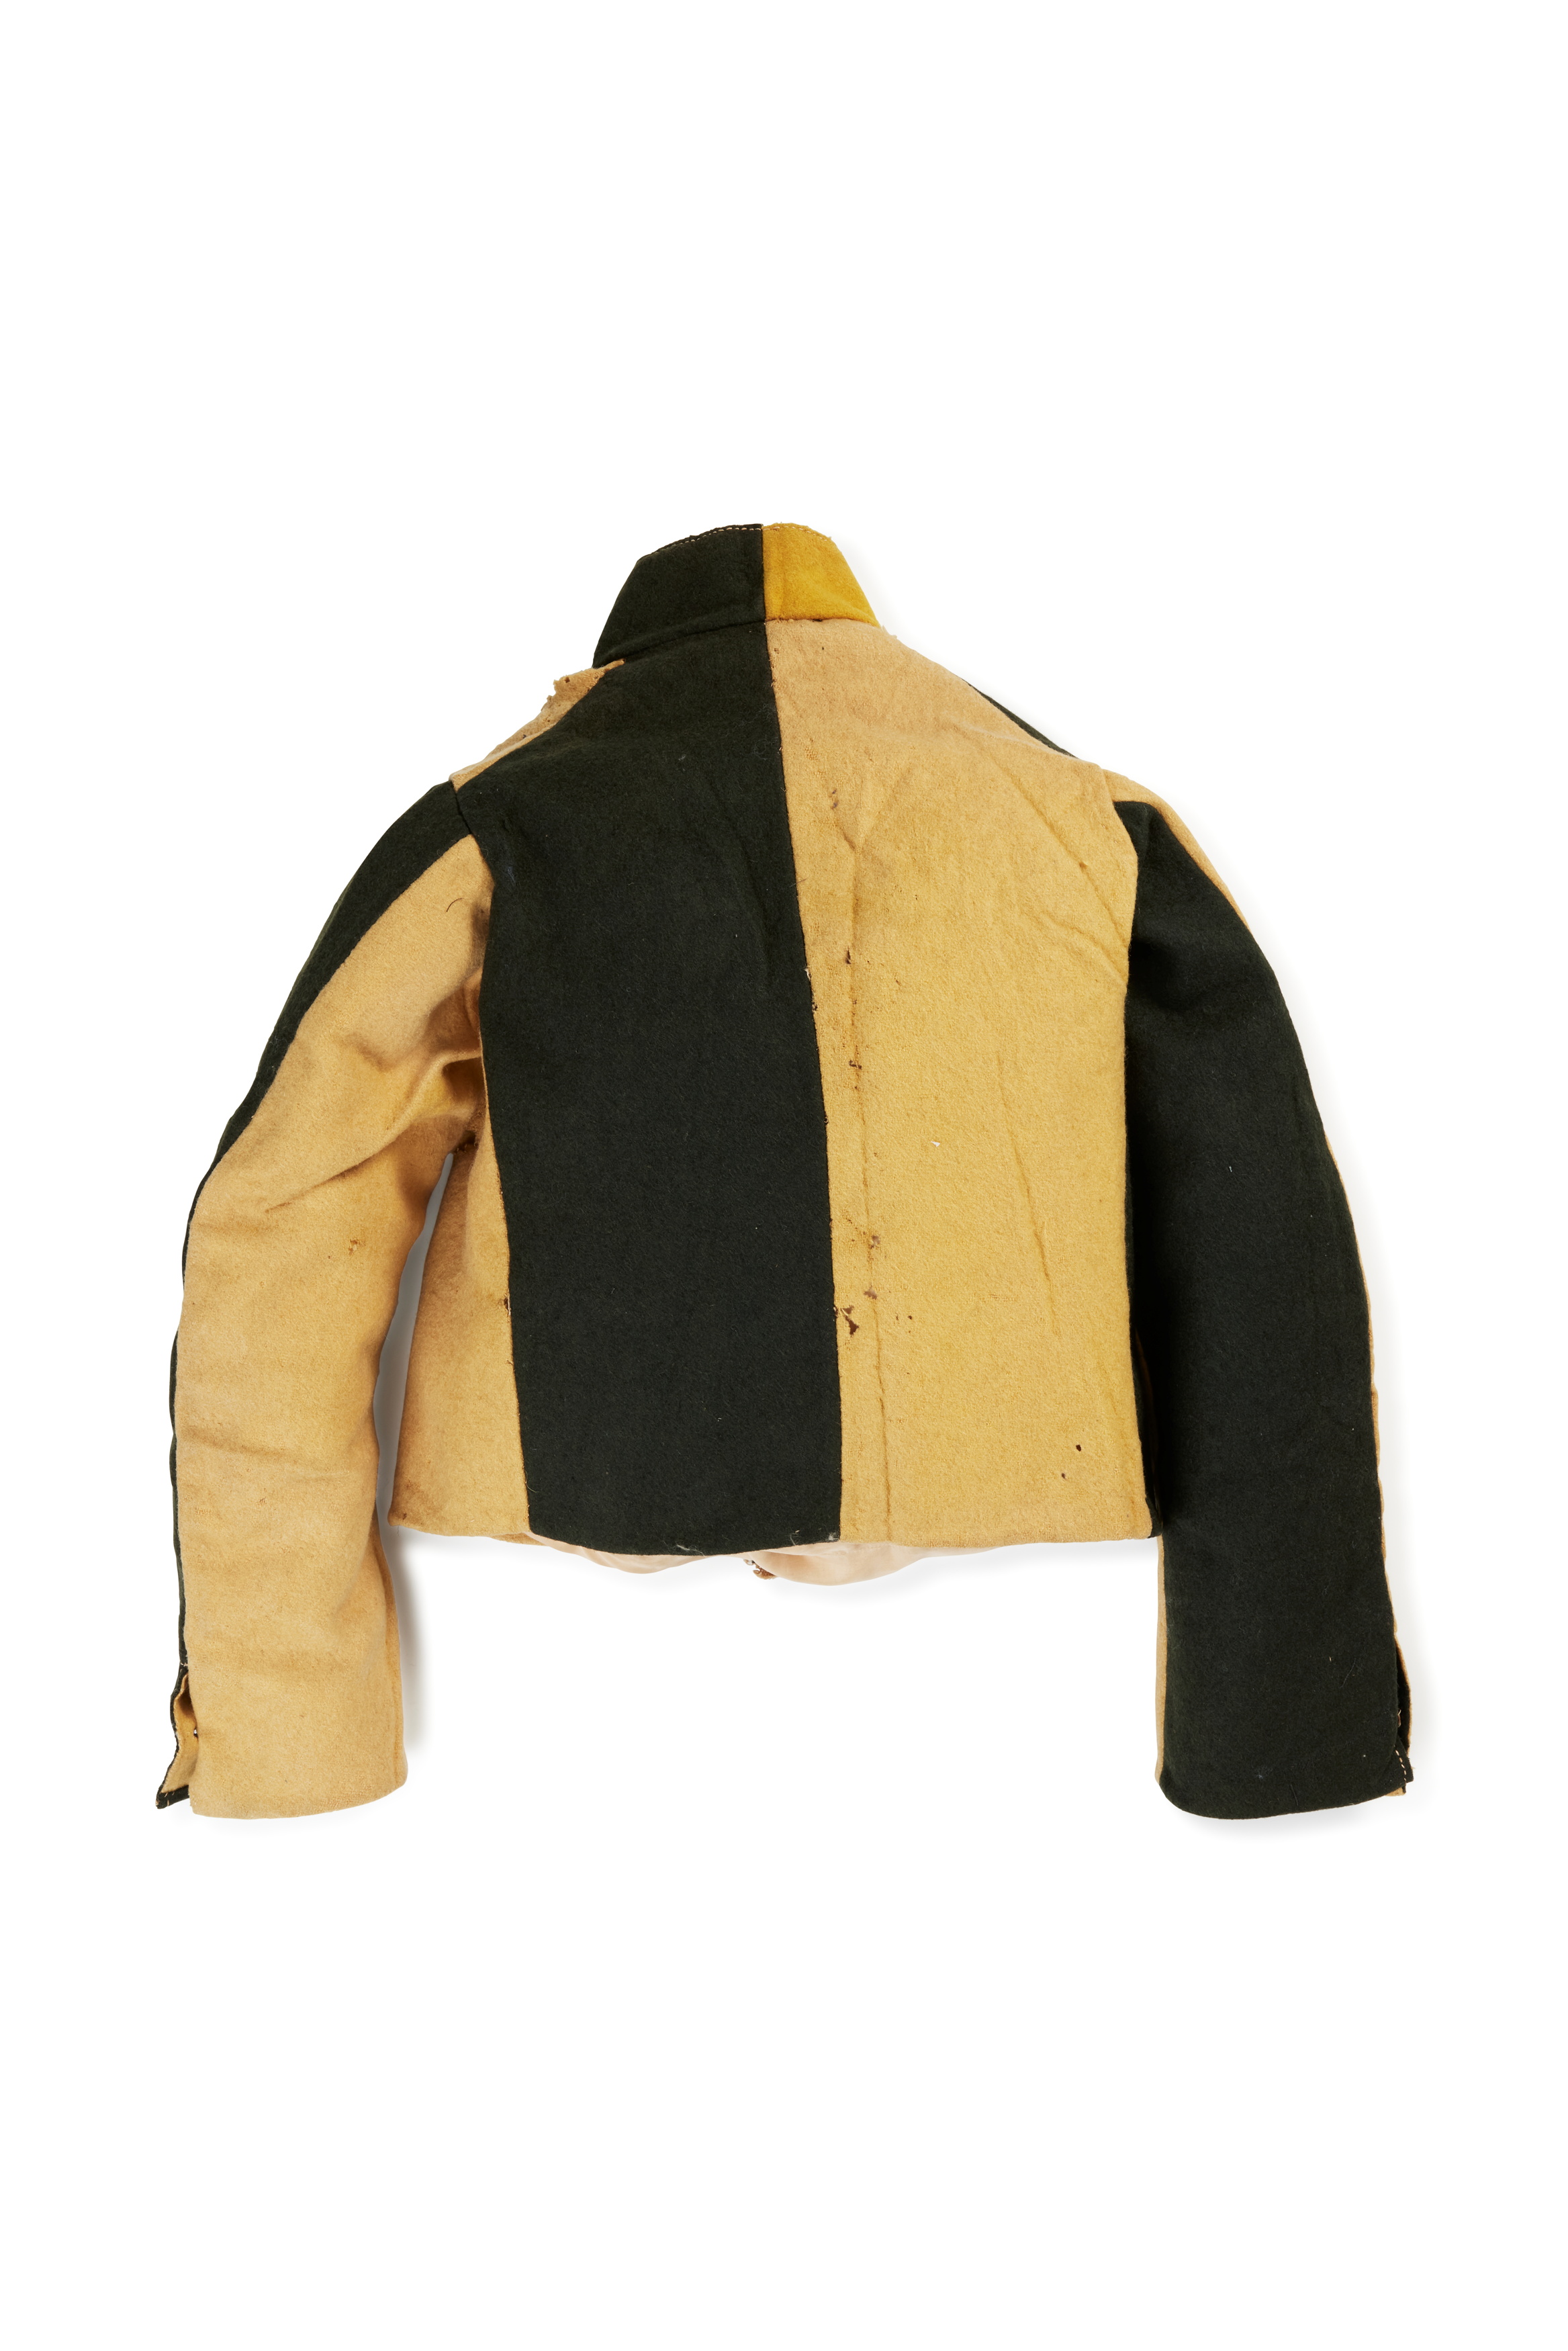 Convict jacket from England worn in Australia